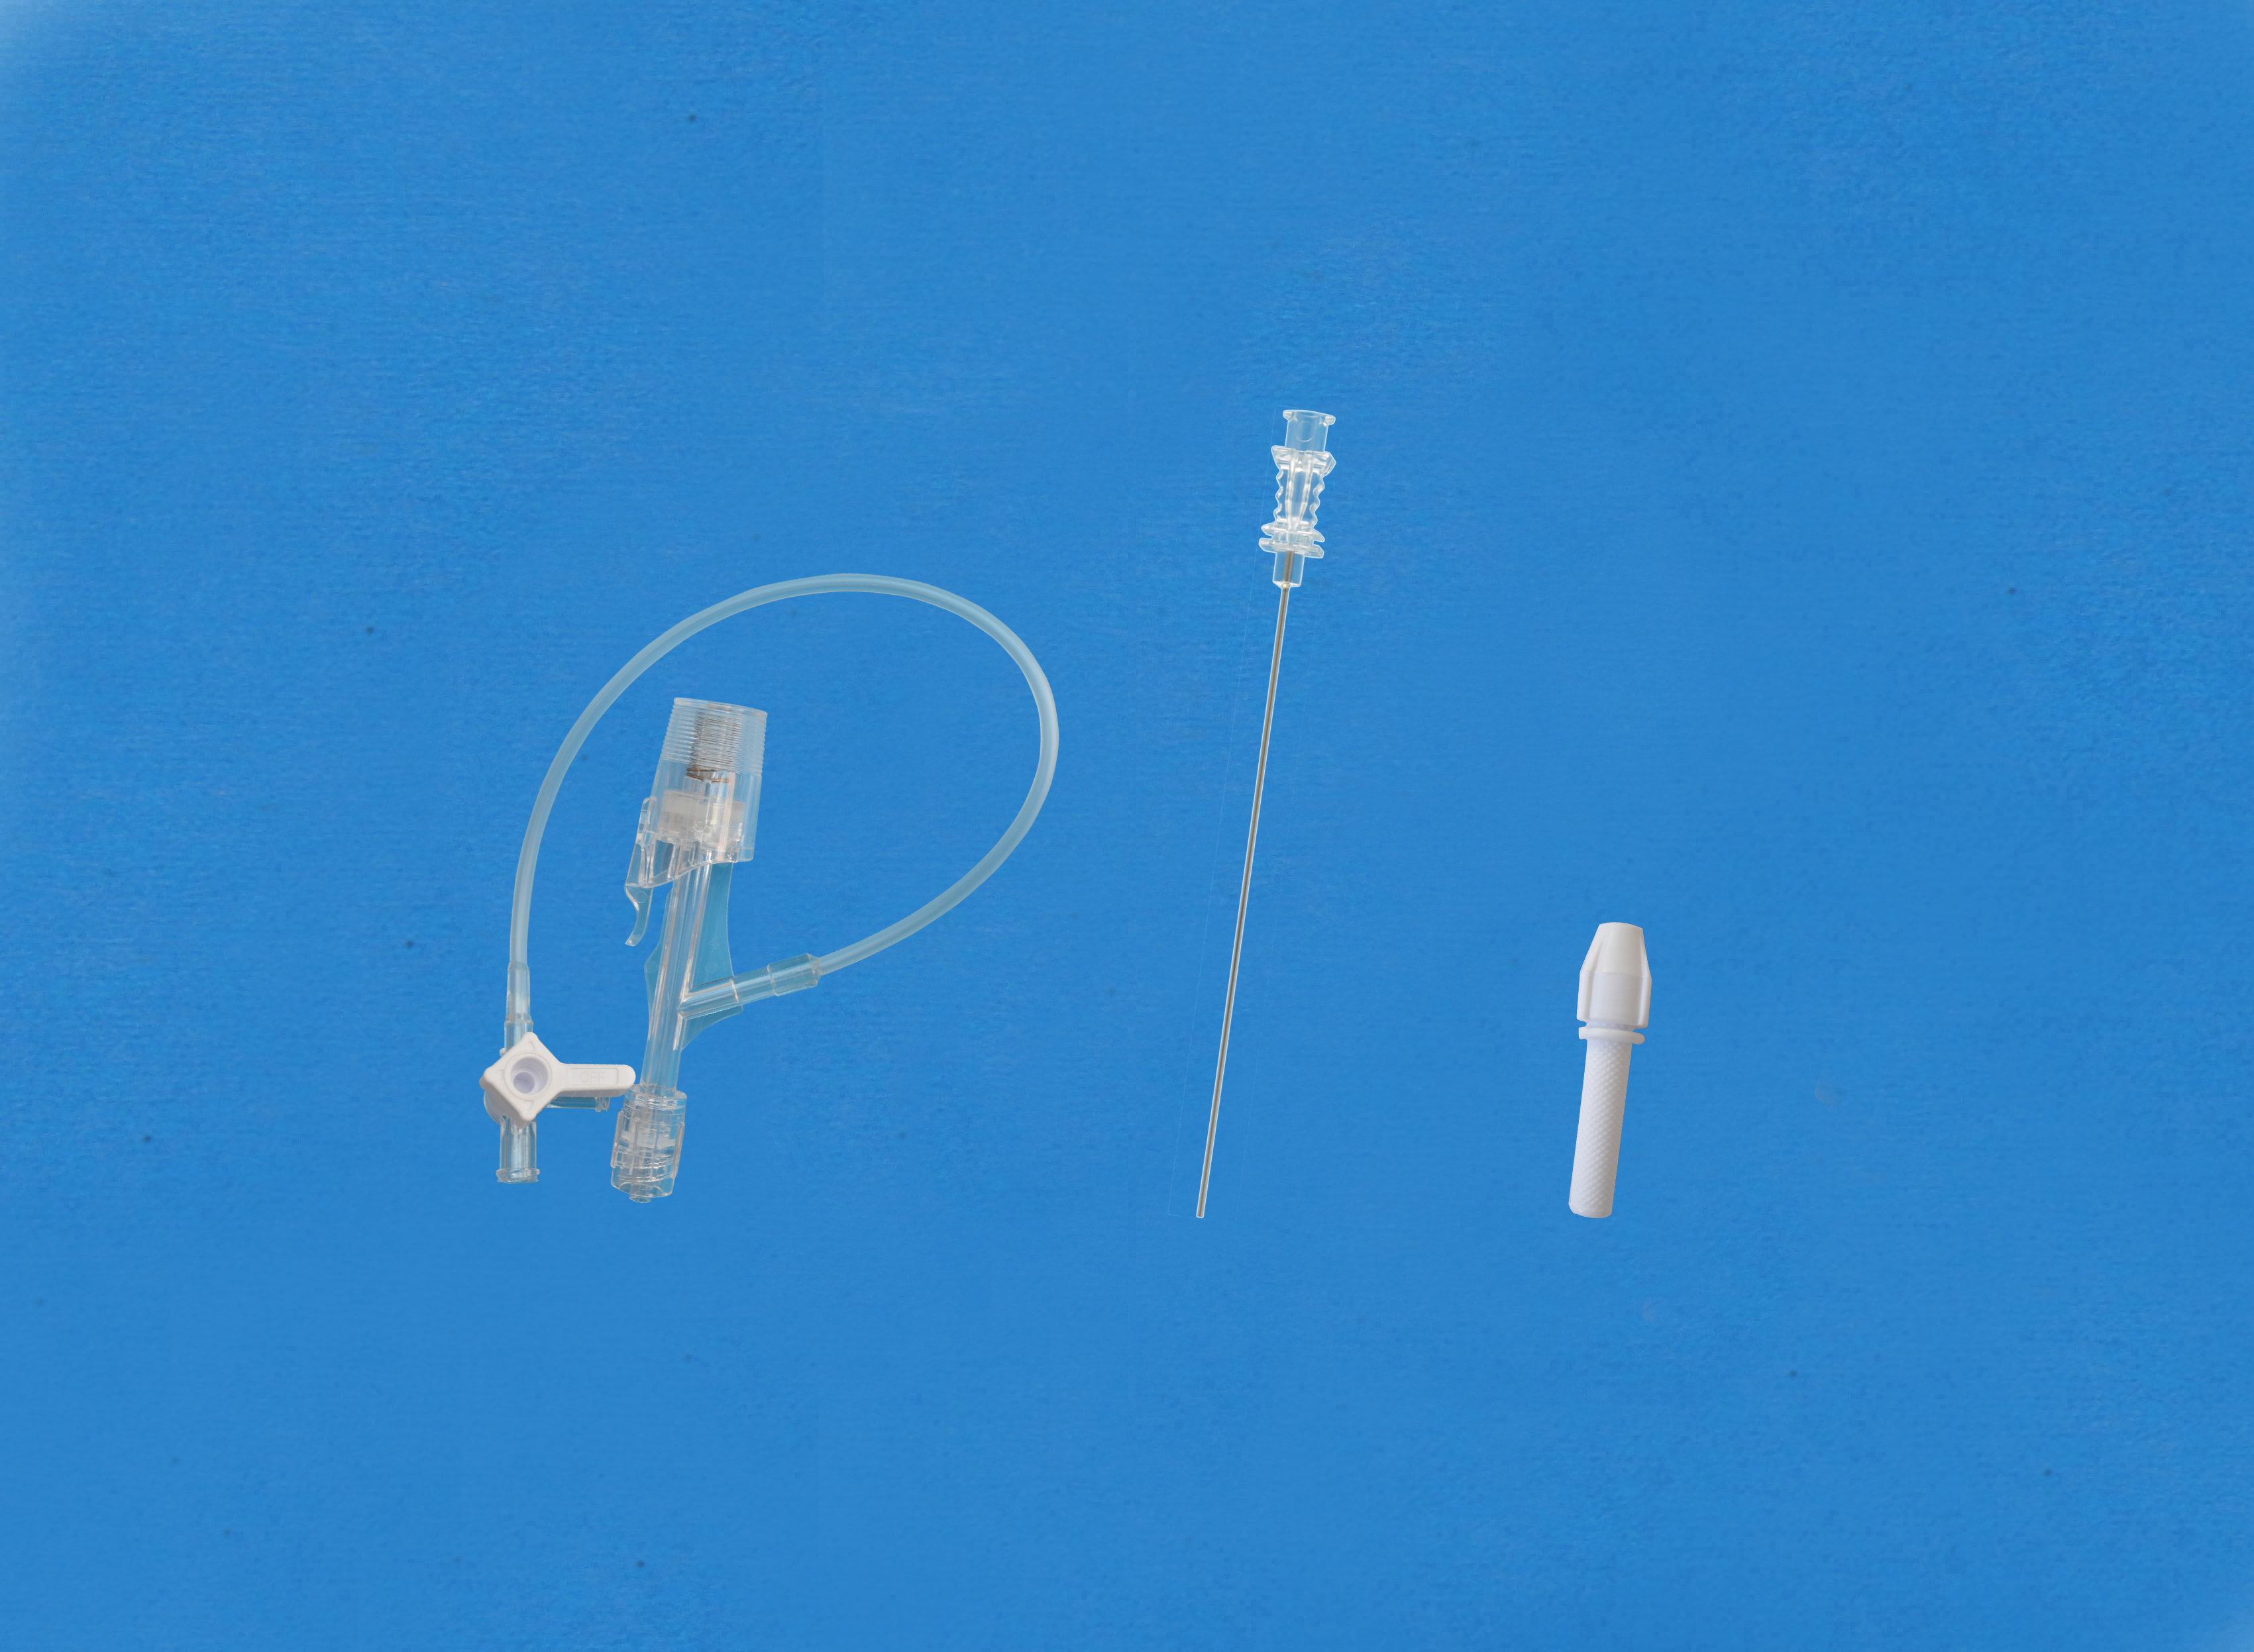 Haemostatic valves, Y click, Sideon Tubing and Stopcock, Insertion Tool with Large Hub, White/Copper Torquer